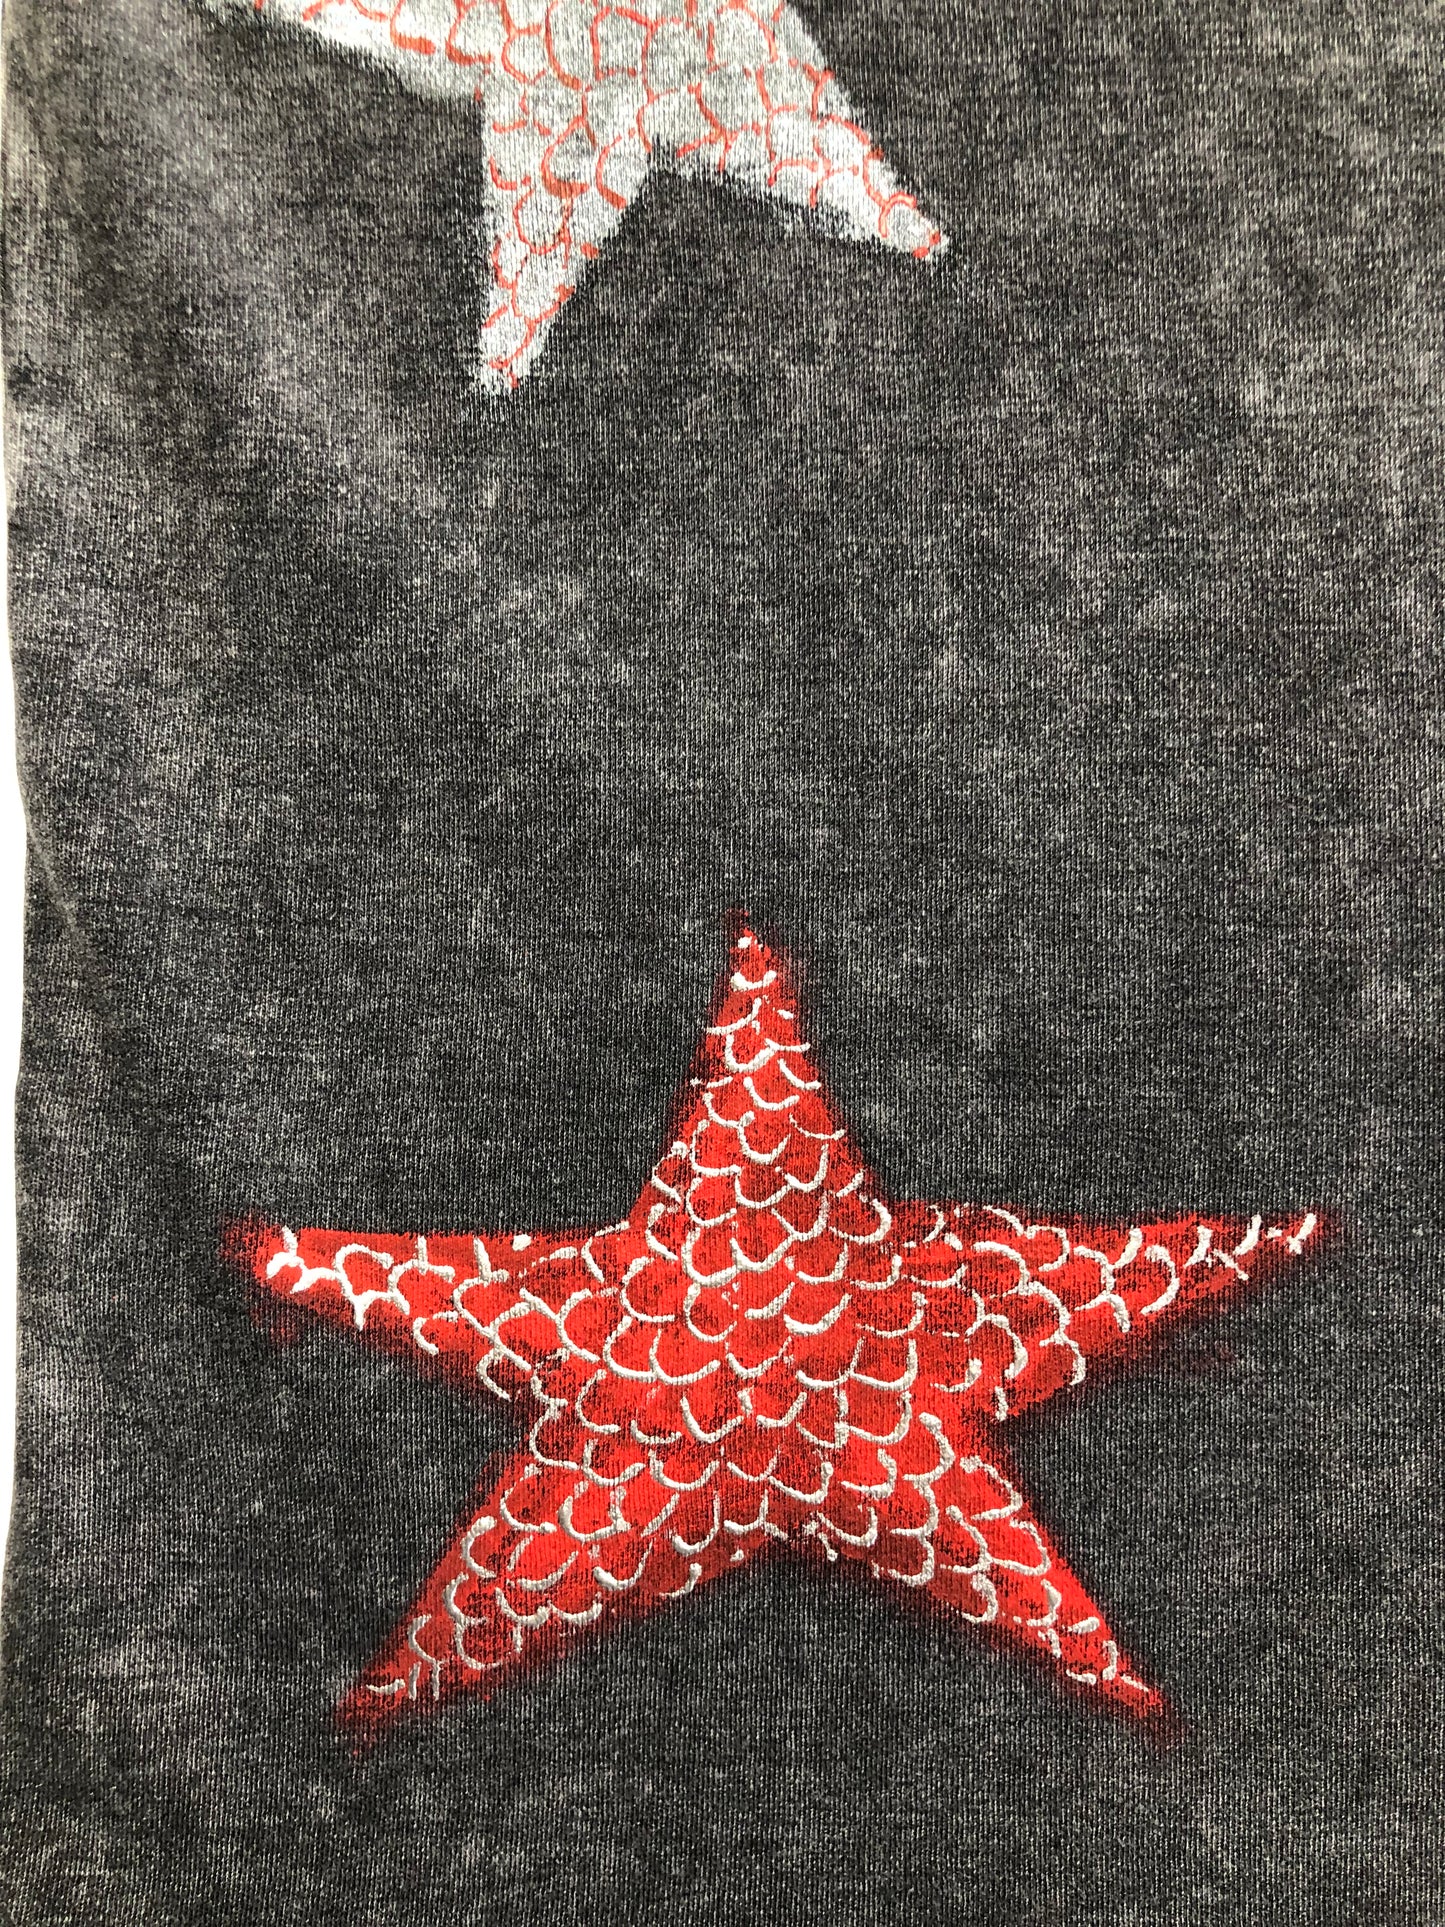 Red star on clothes in detail. Hand painted t-shirt.